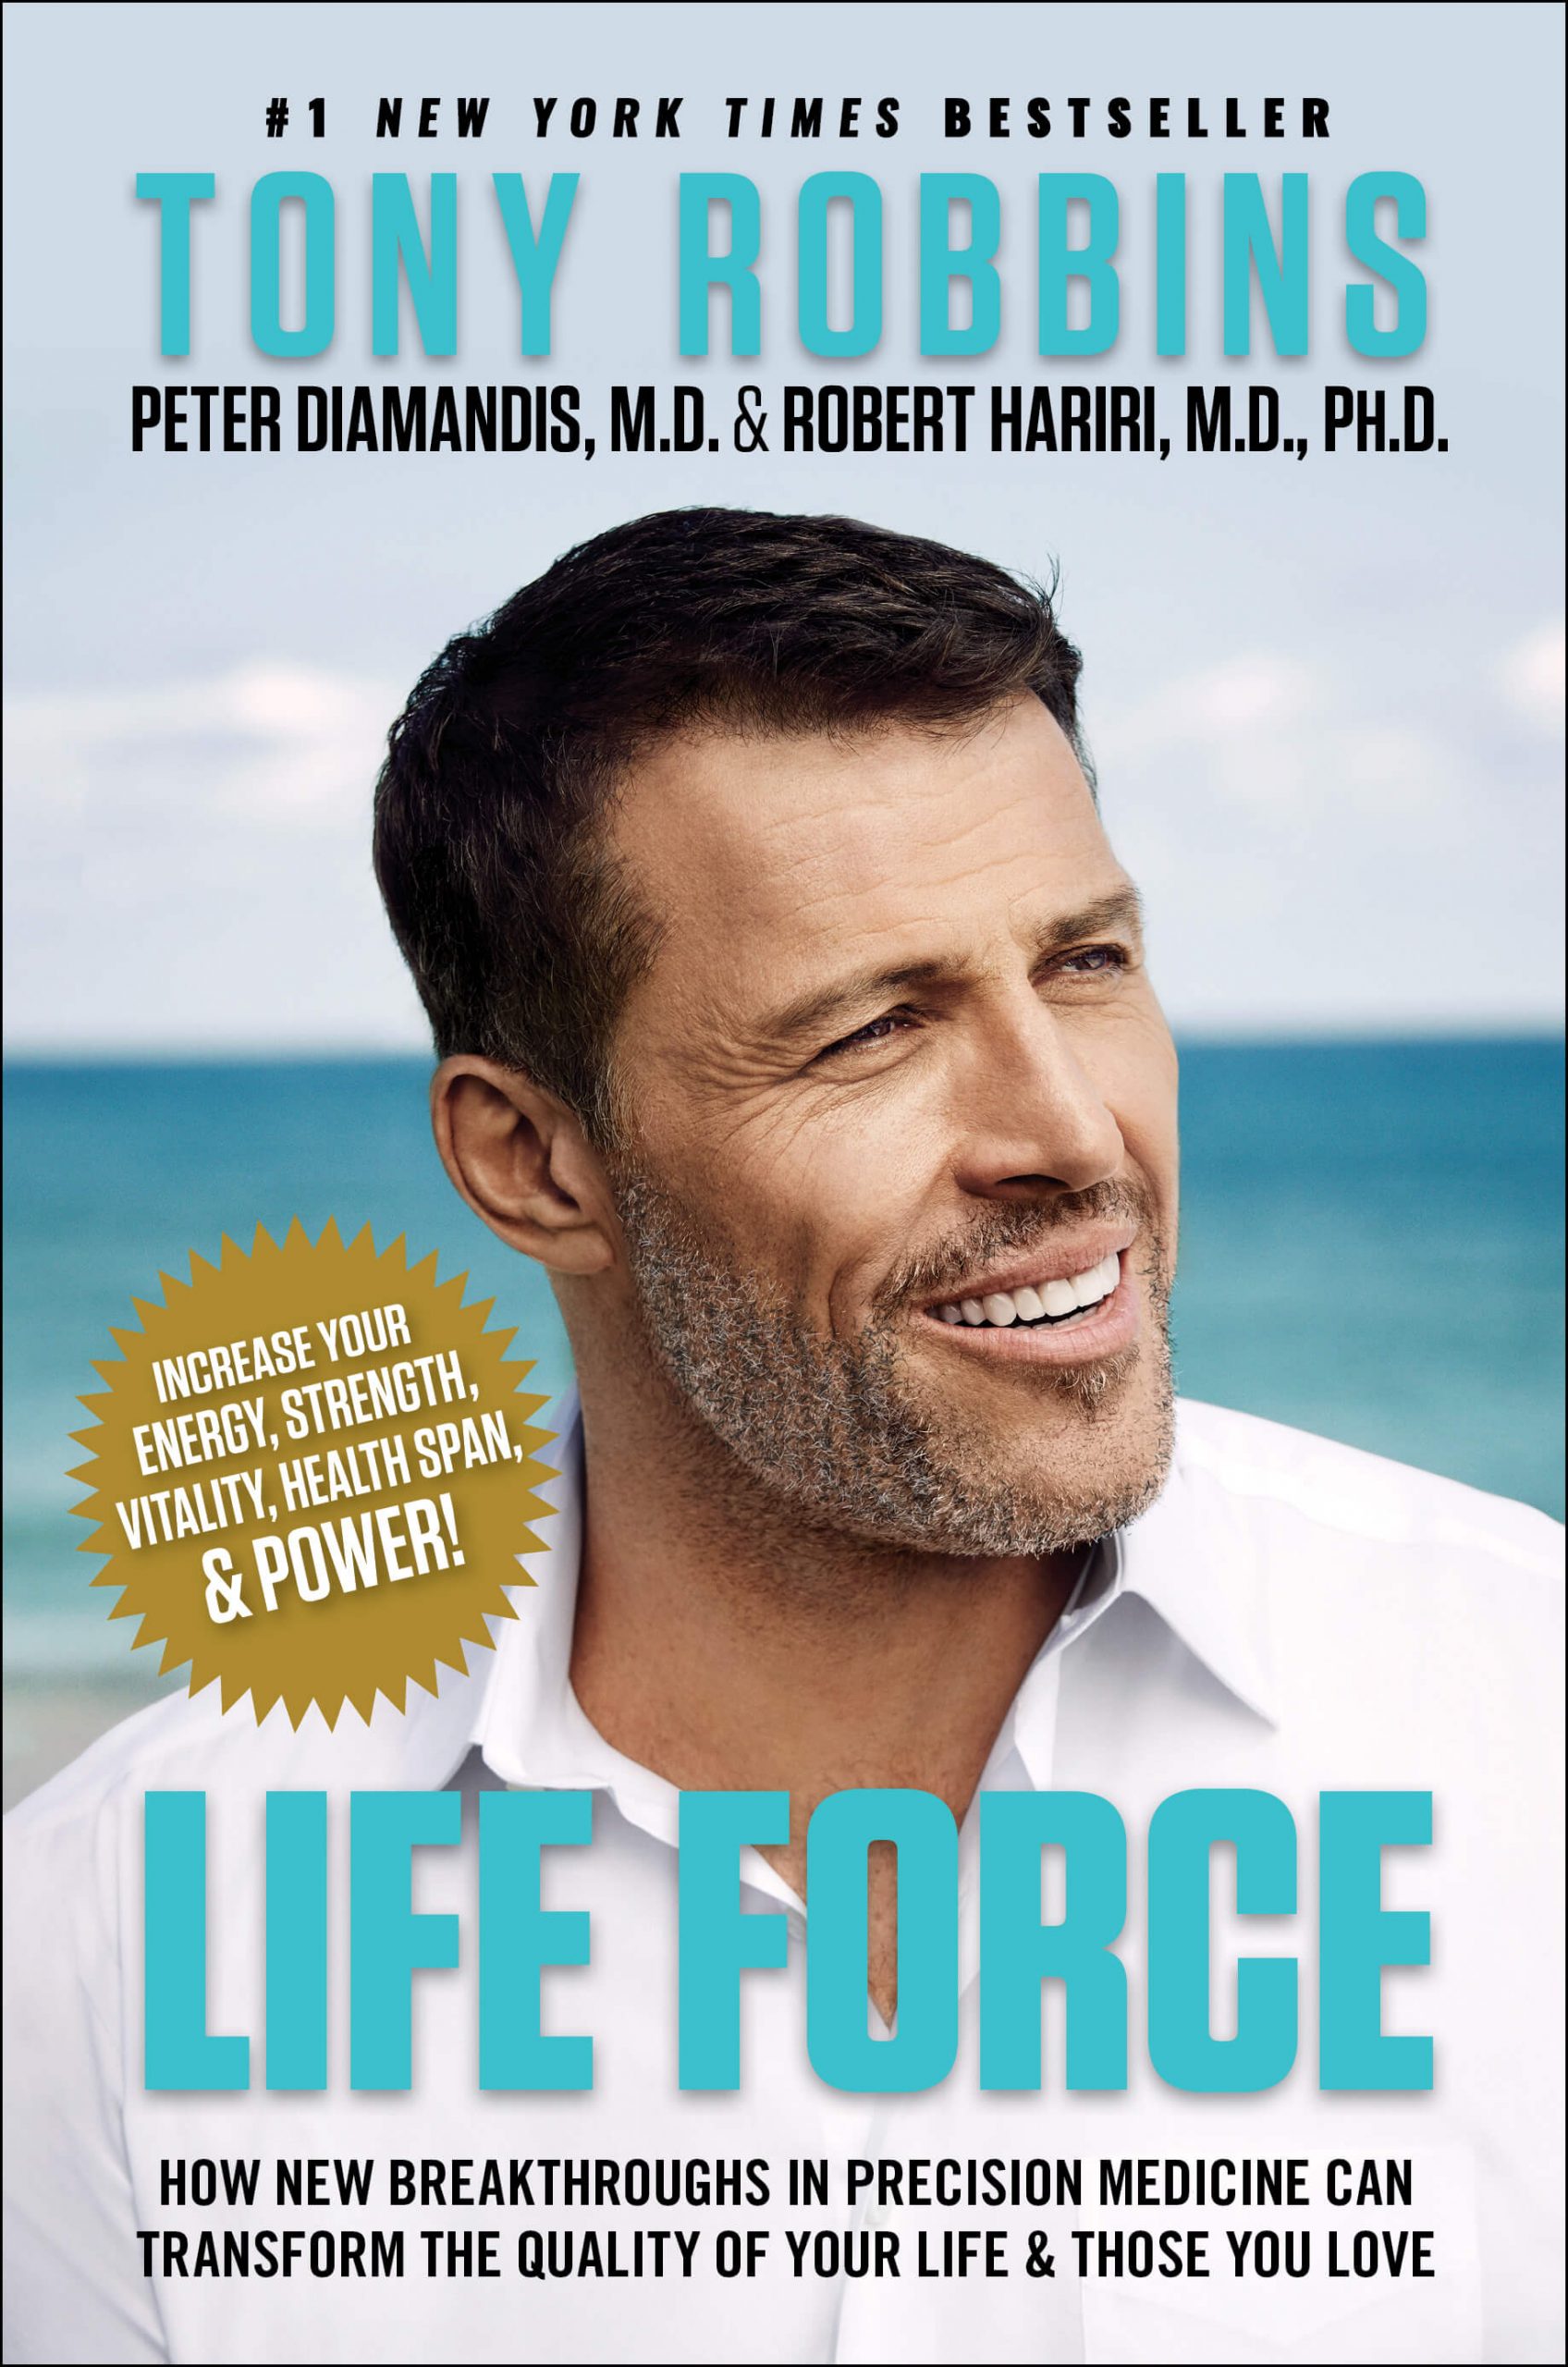 Tony Robbins Books: The Official List